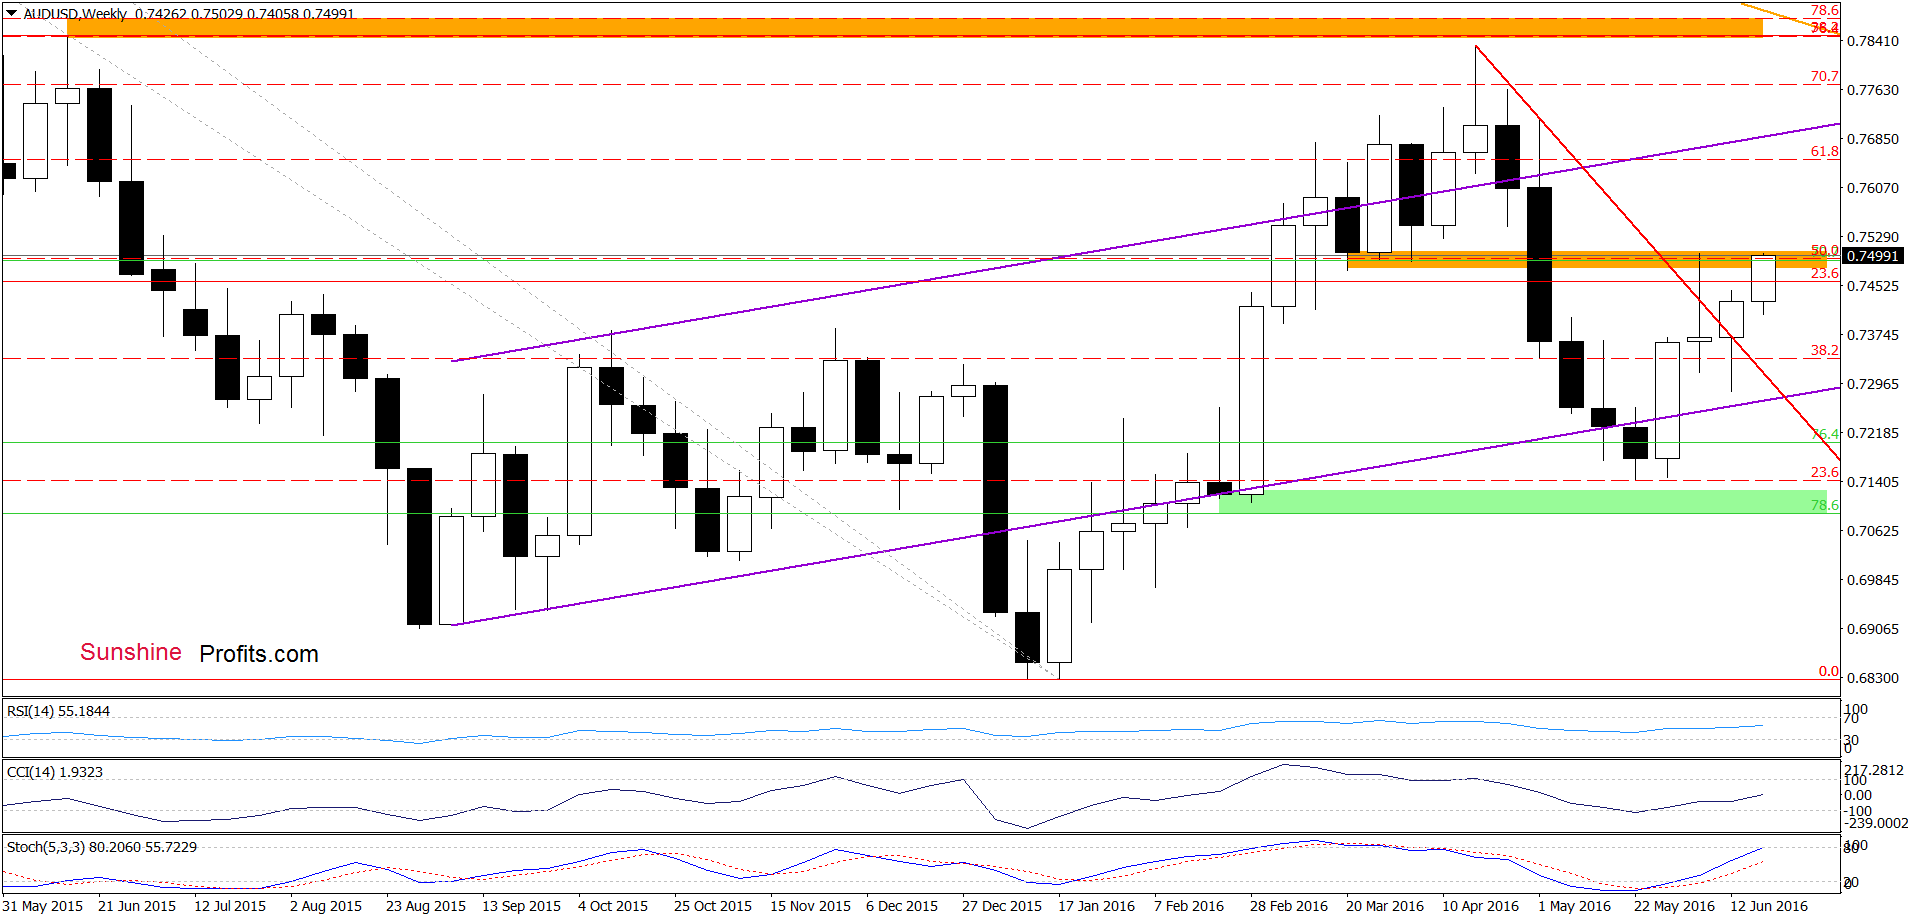 AUD/USD - the weekly chart